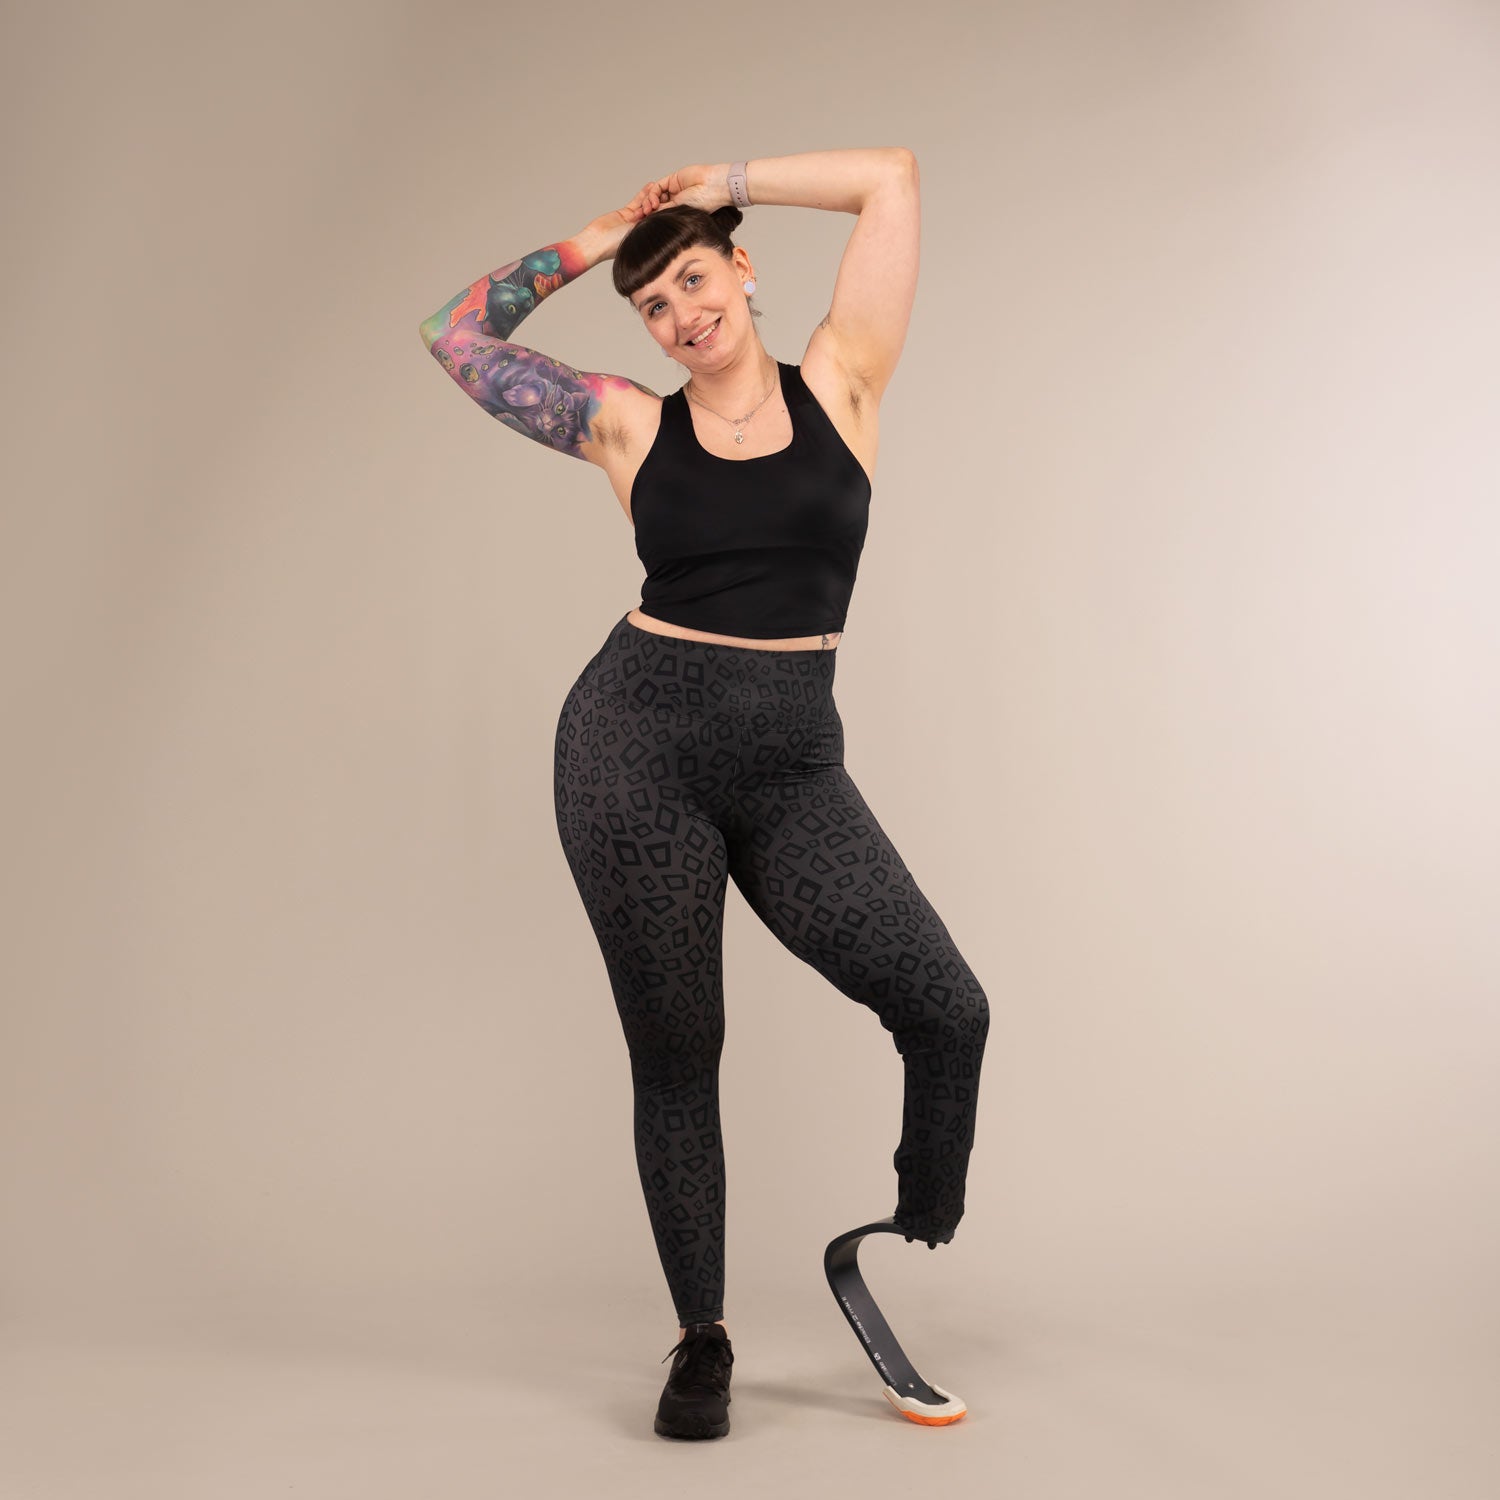 TITAN MINIMAL LEOPARD | Printed Recycled Leggings | 3RD ROCK Clothing -  Laura is 5ft 6 with a 31.5" waist, 43" hips and wears a size 14 F